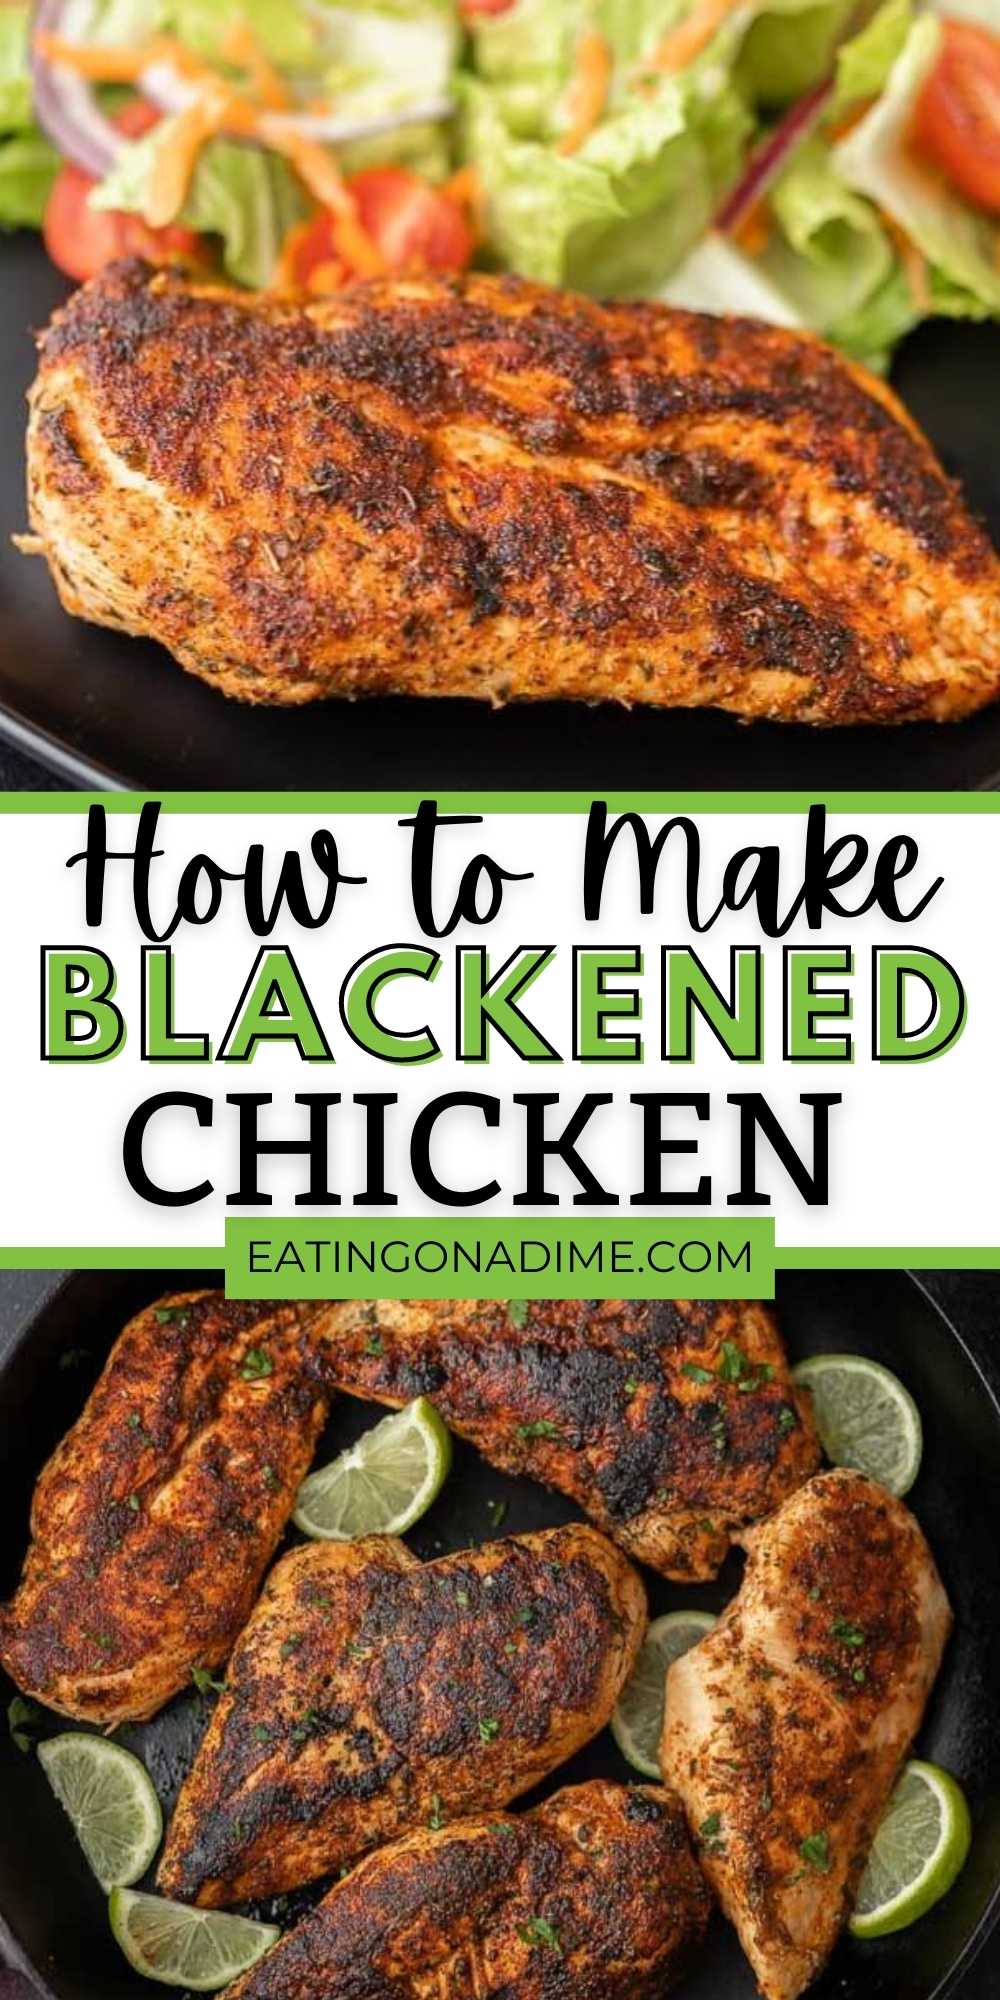 This is the best blackened chicken recipe.This quick and easy blackened chicken recipe is ready in 15 minutes making baked blackened chicken a quick dinner. Learn how to make blackened chicken with only 3 ingredients.  You will love this easy skillet recipe! #eatingonadime #chickenrecipes #blackenedrecipes 
